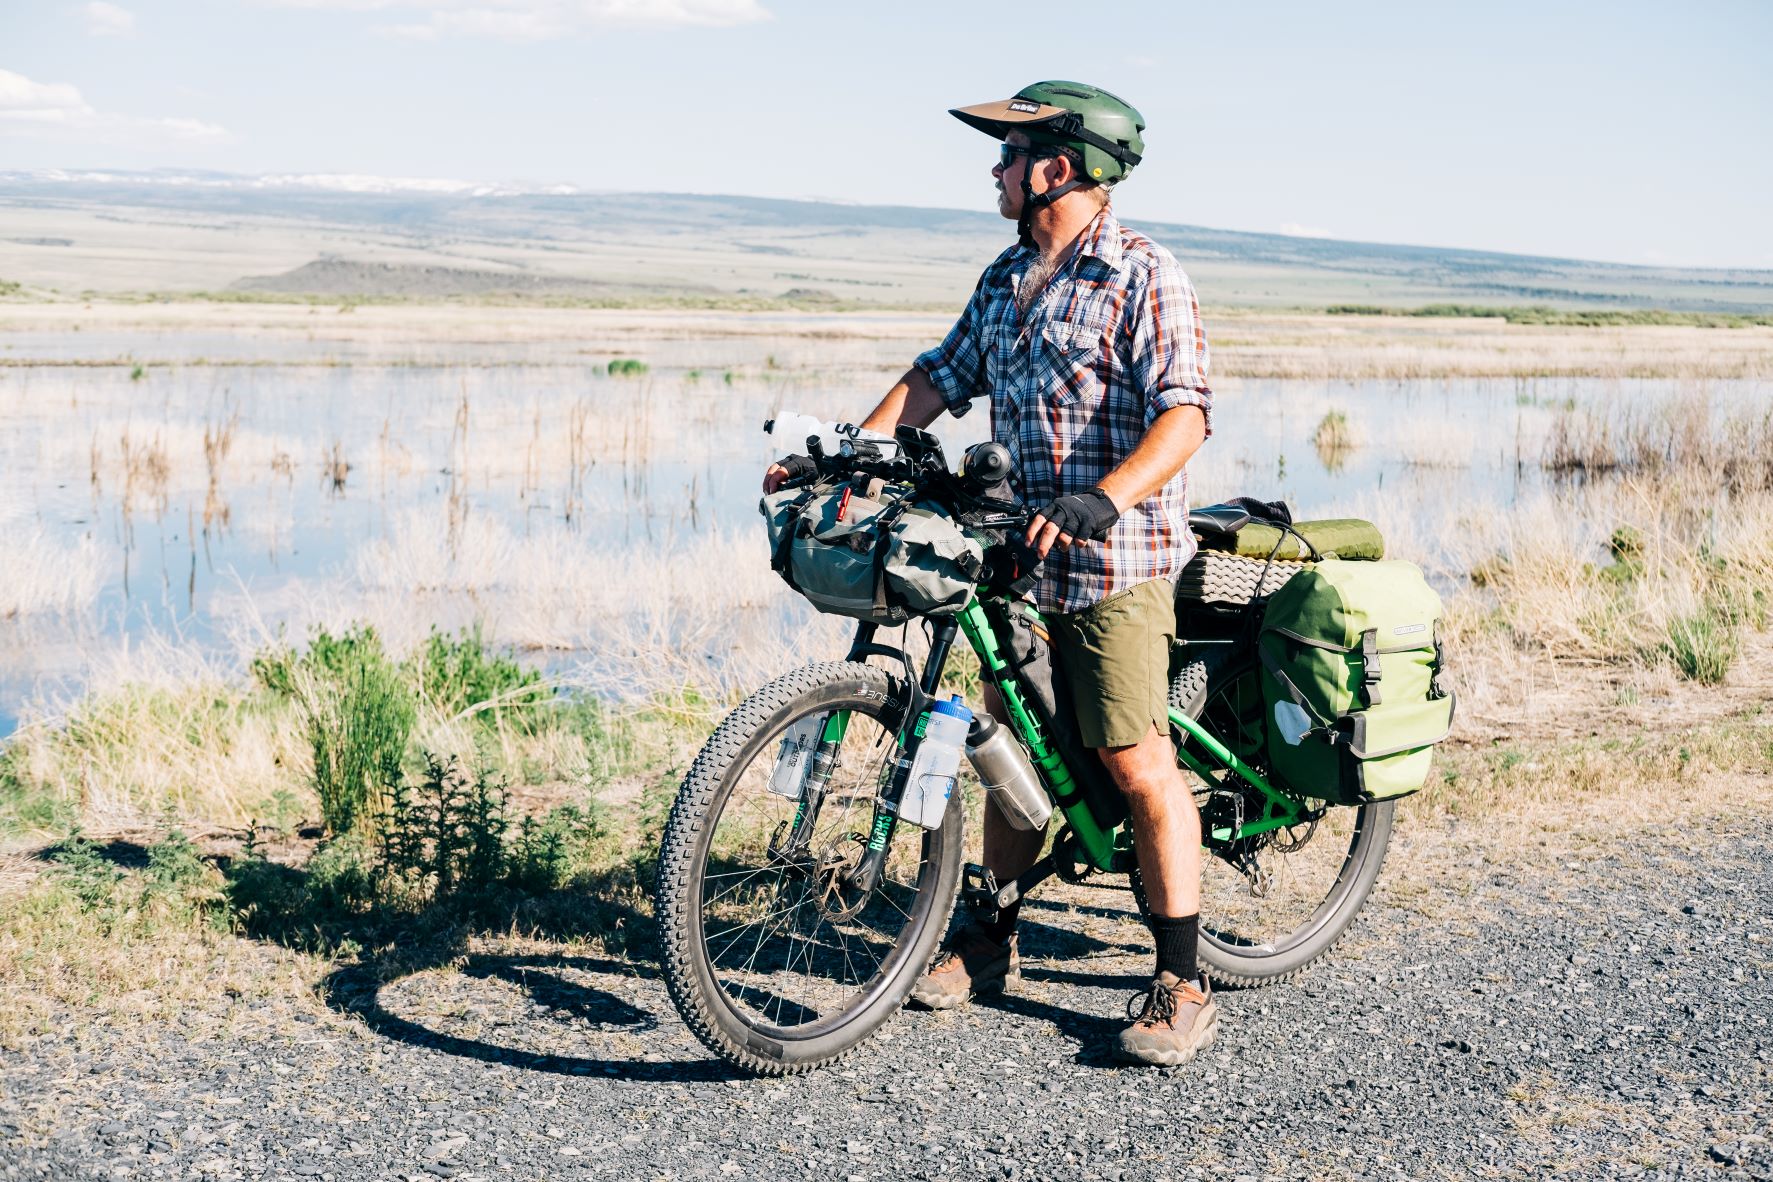 Derrick Knowles on his mountain bike, loaded with gear for bikepacking.